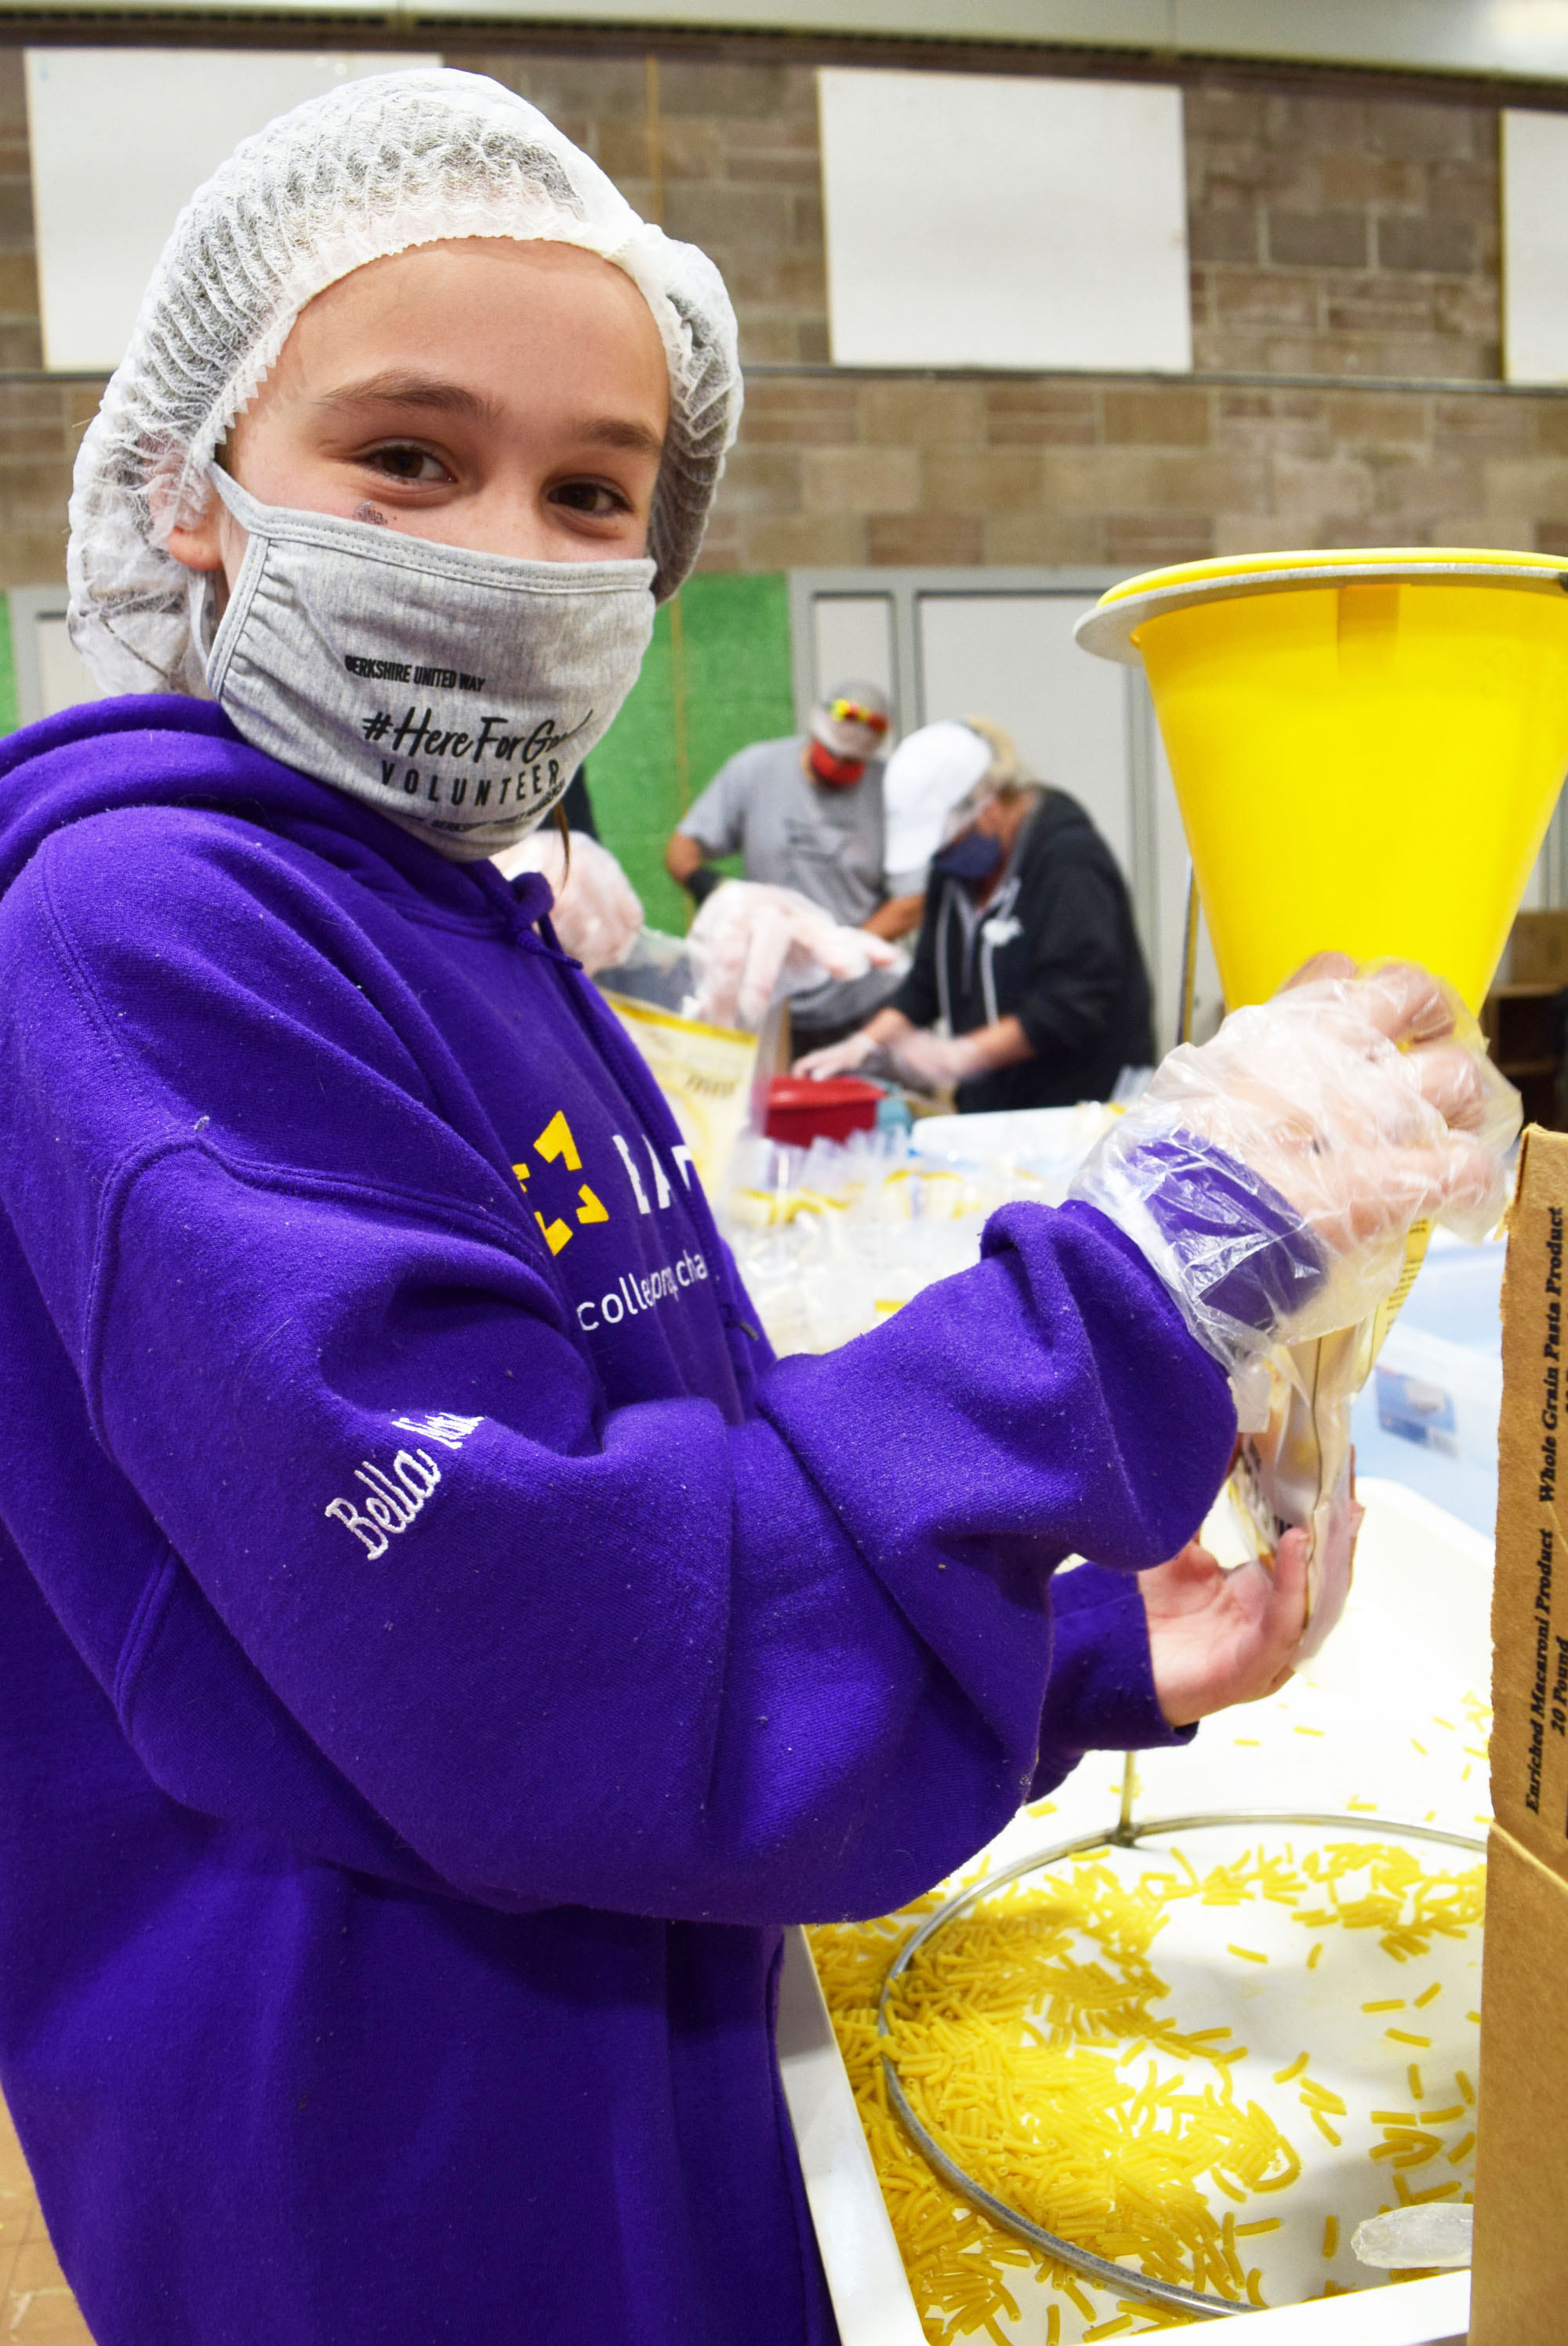 Bella, a student at BART, packs meal bags at an April 17 volunteer event